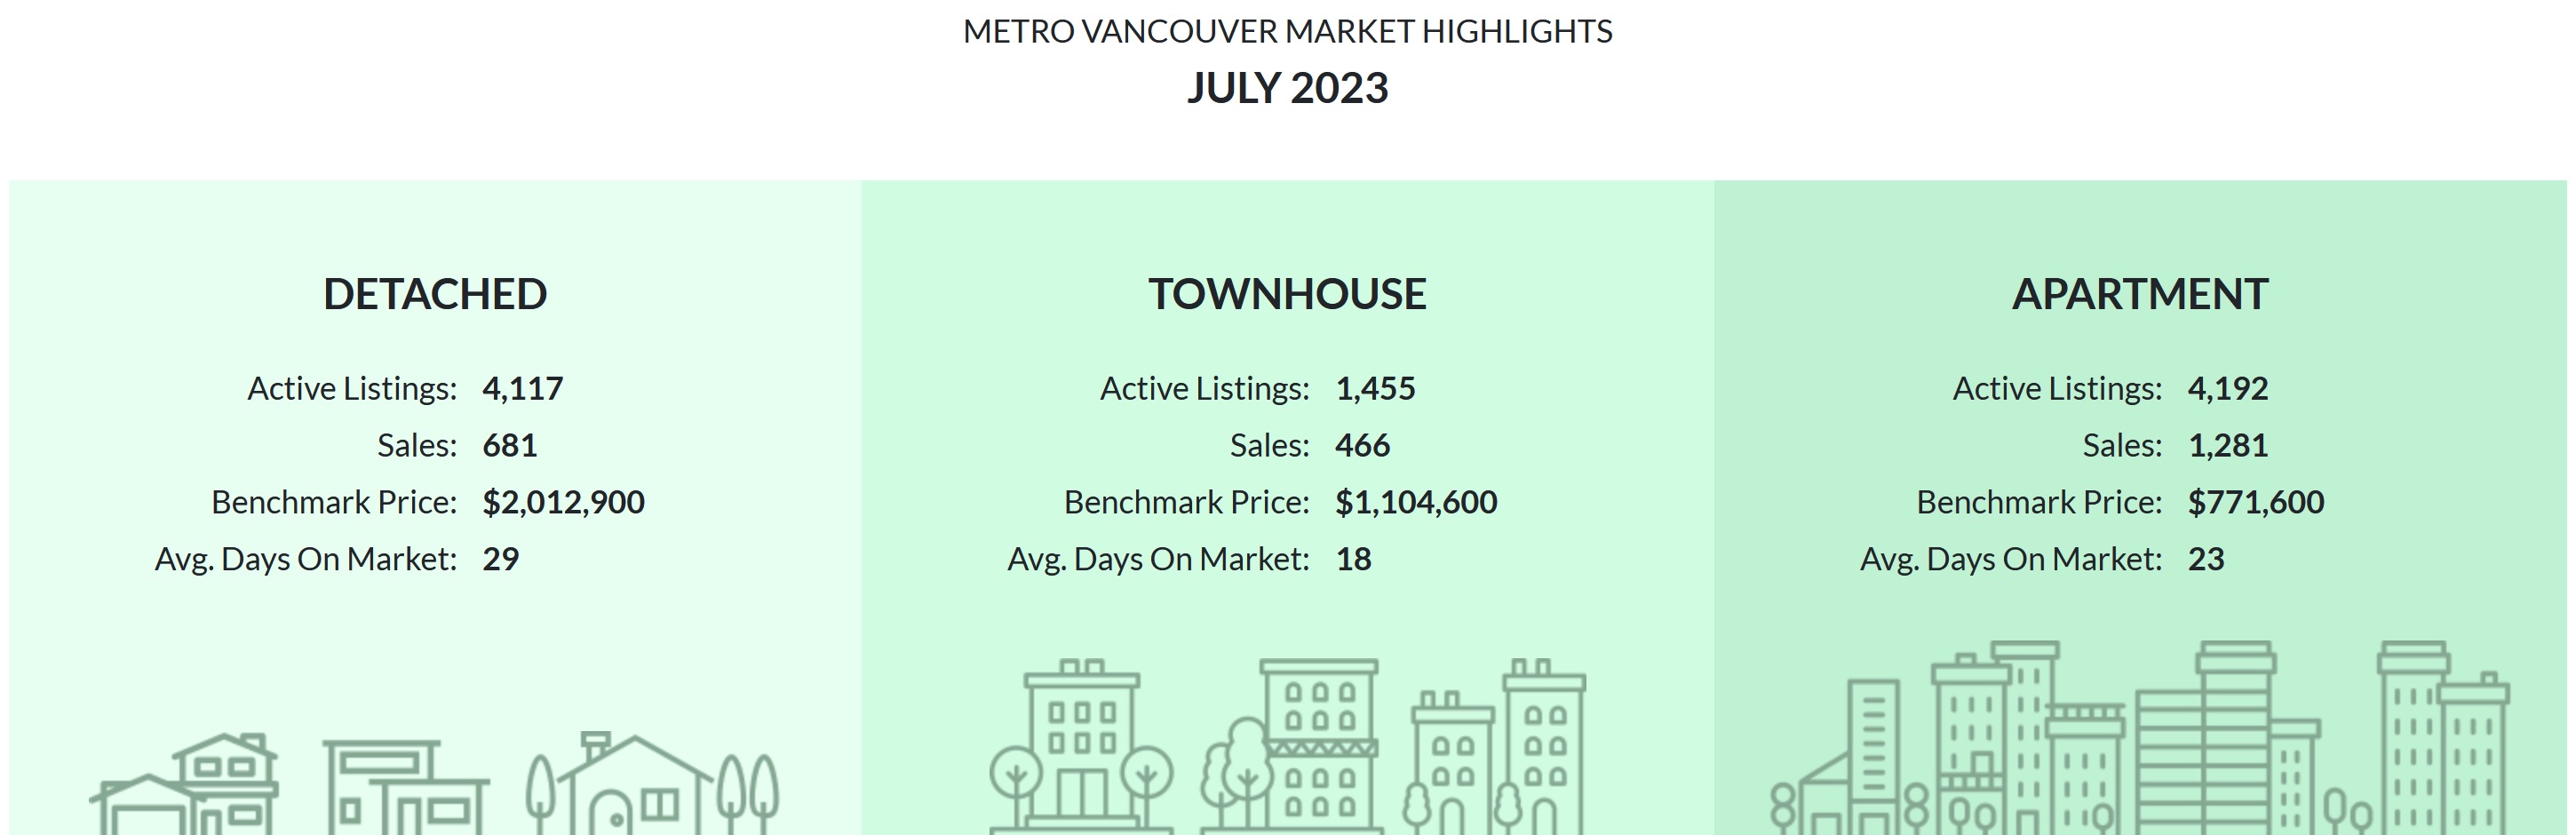 metro vancouver july 2023 market highlights